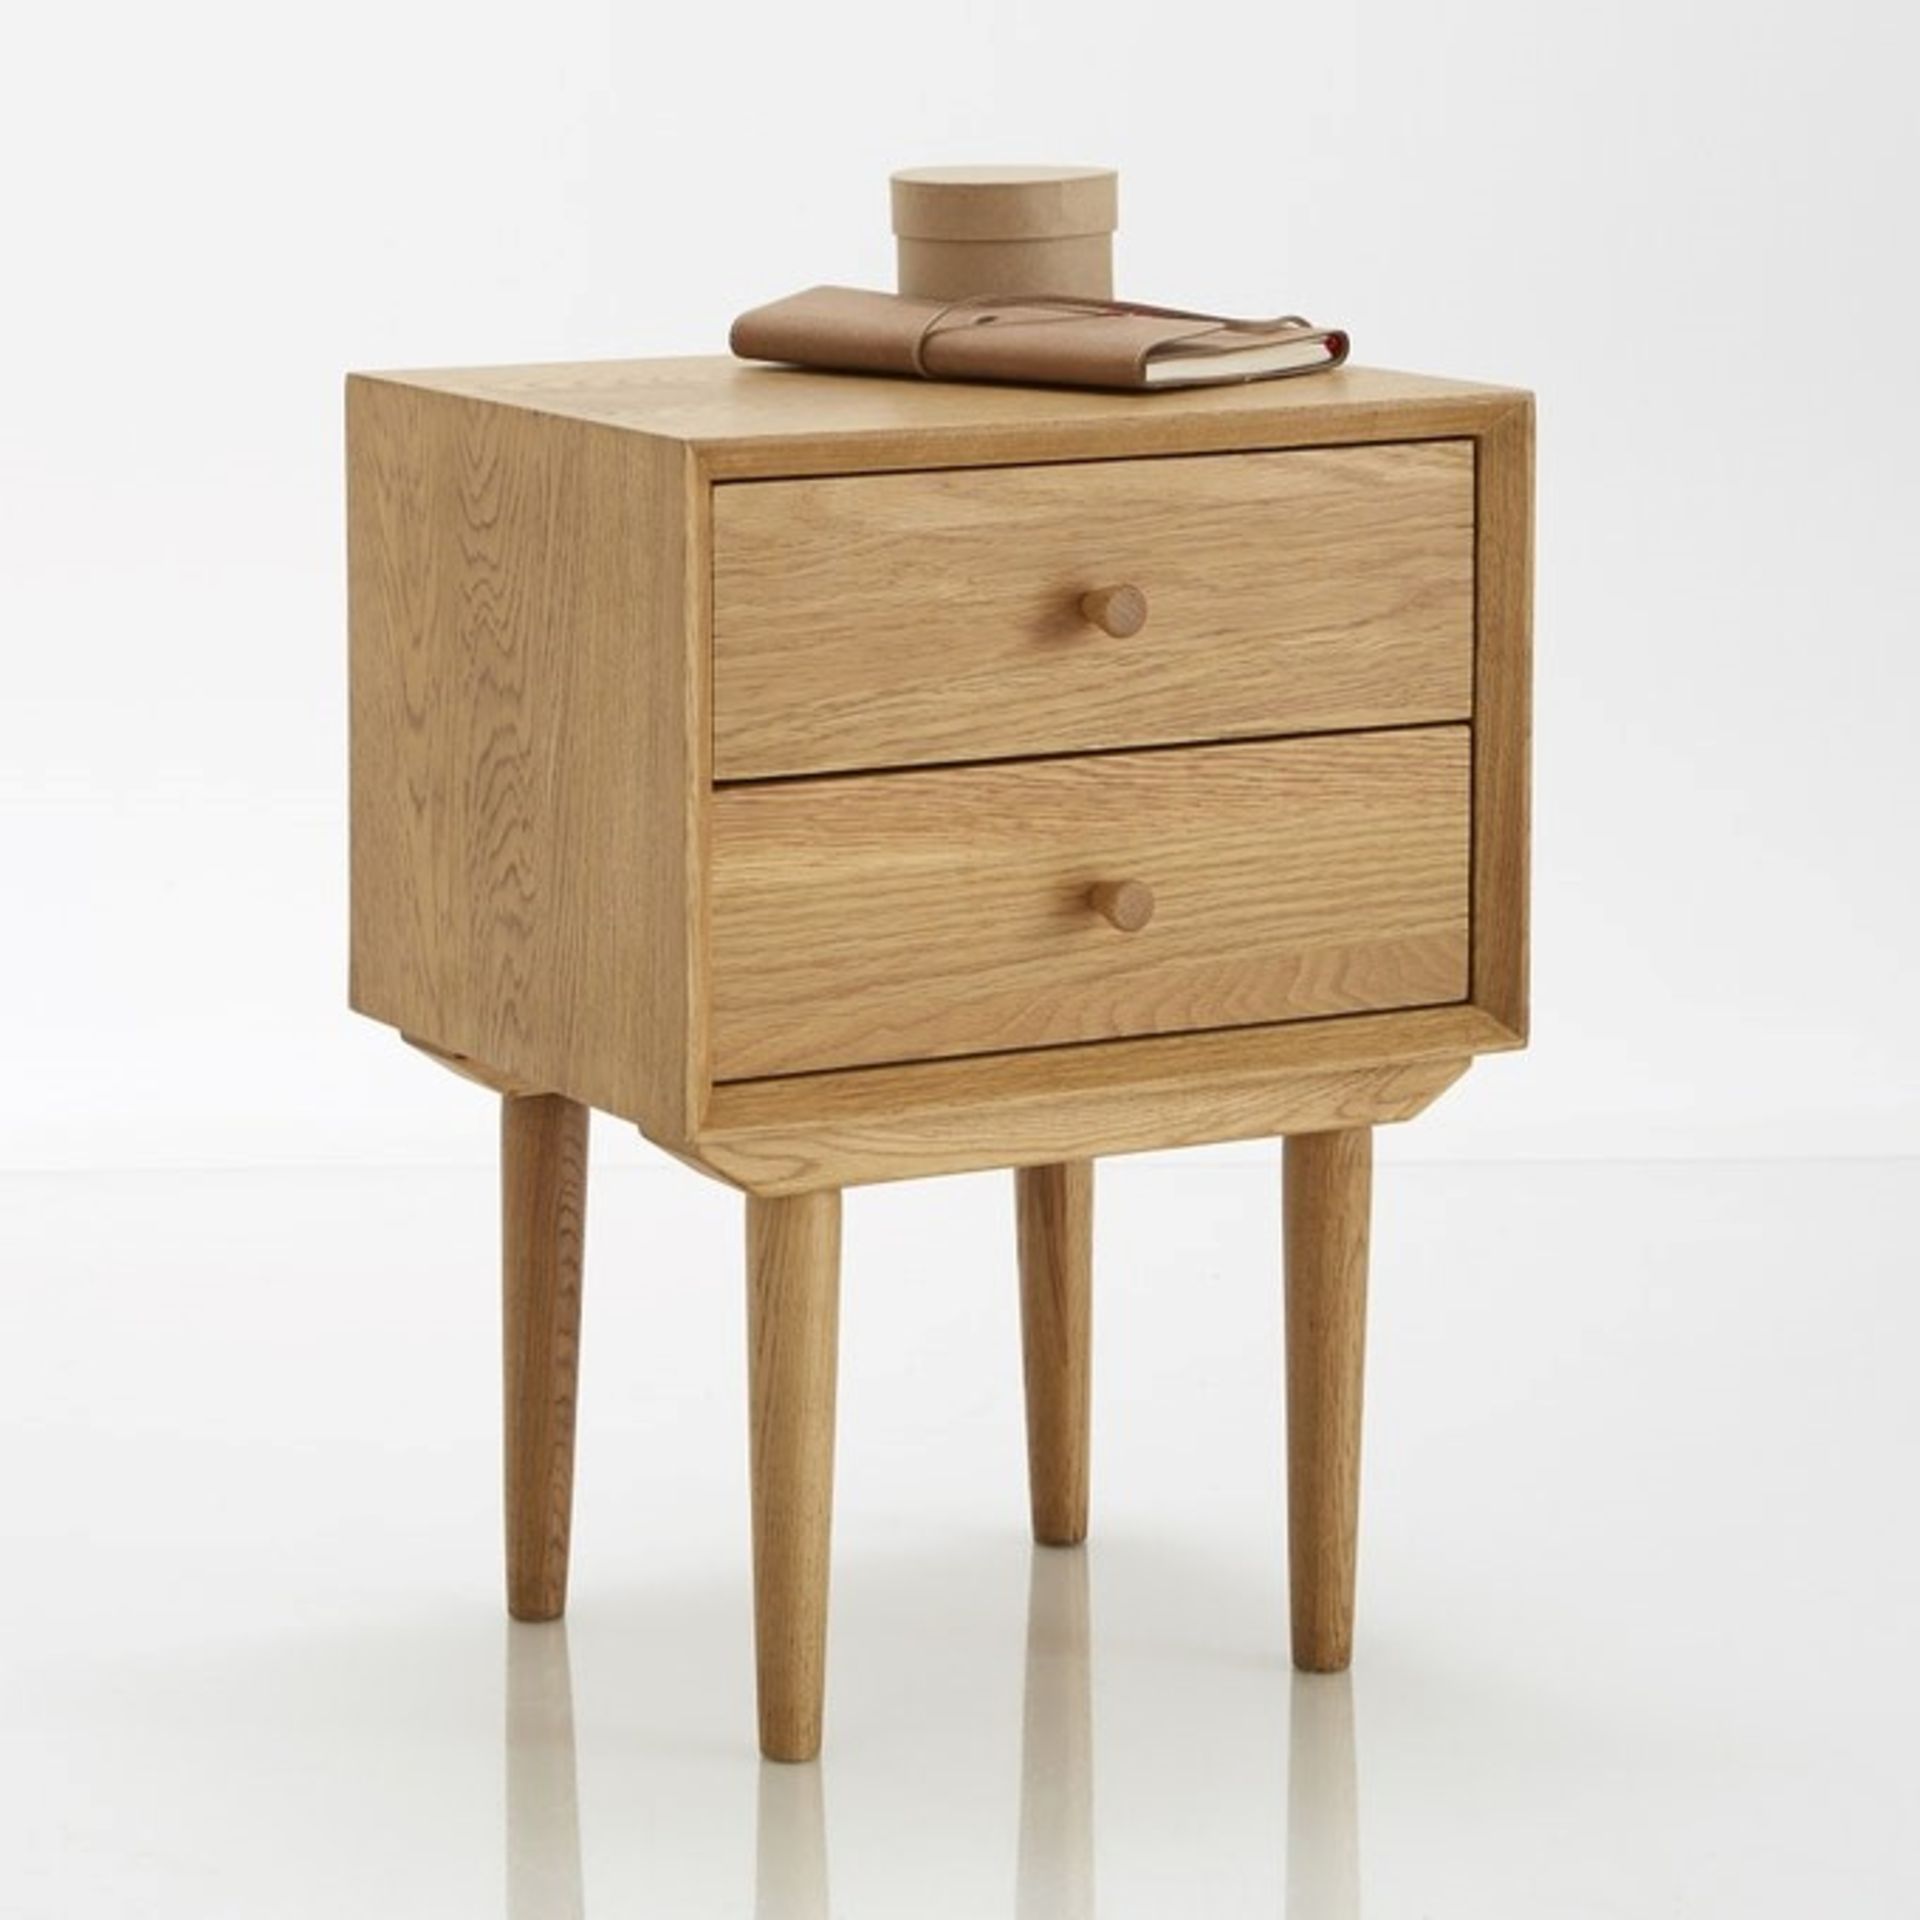 1 GRADE B BOXED QUILDA 2 DRAWER RETRO BEDSIDE TABLE IN LIGHT OAK WOOD / RRP £210.00 (PUBLIC